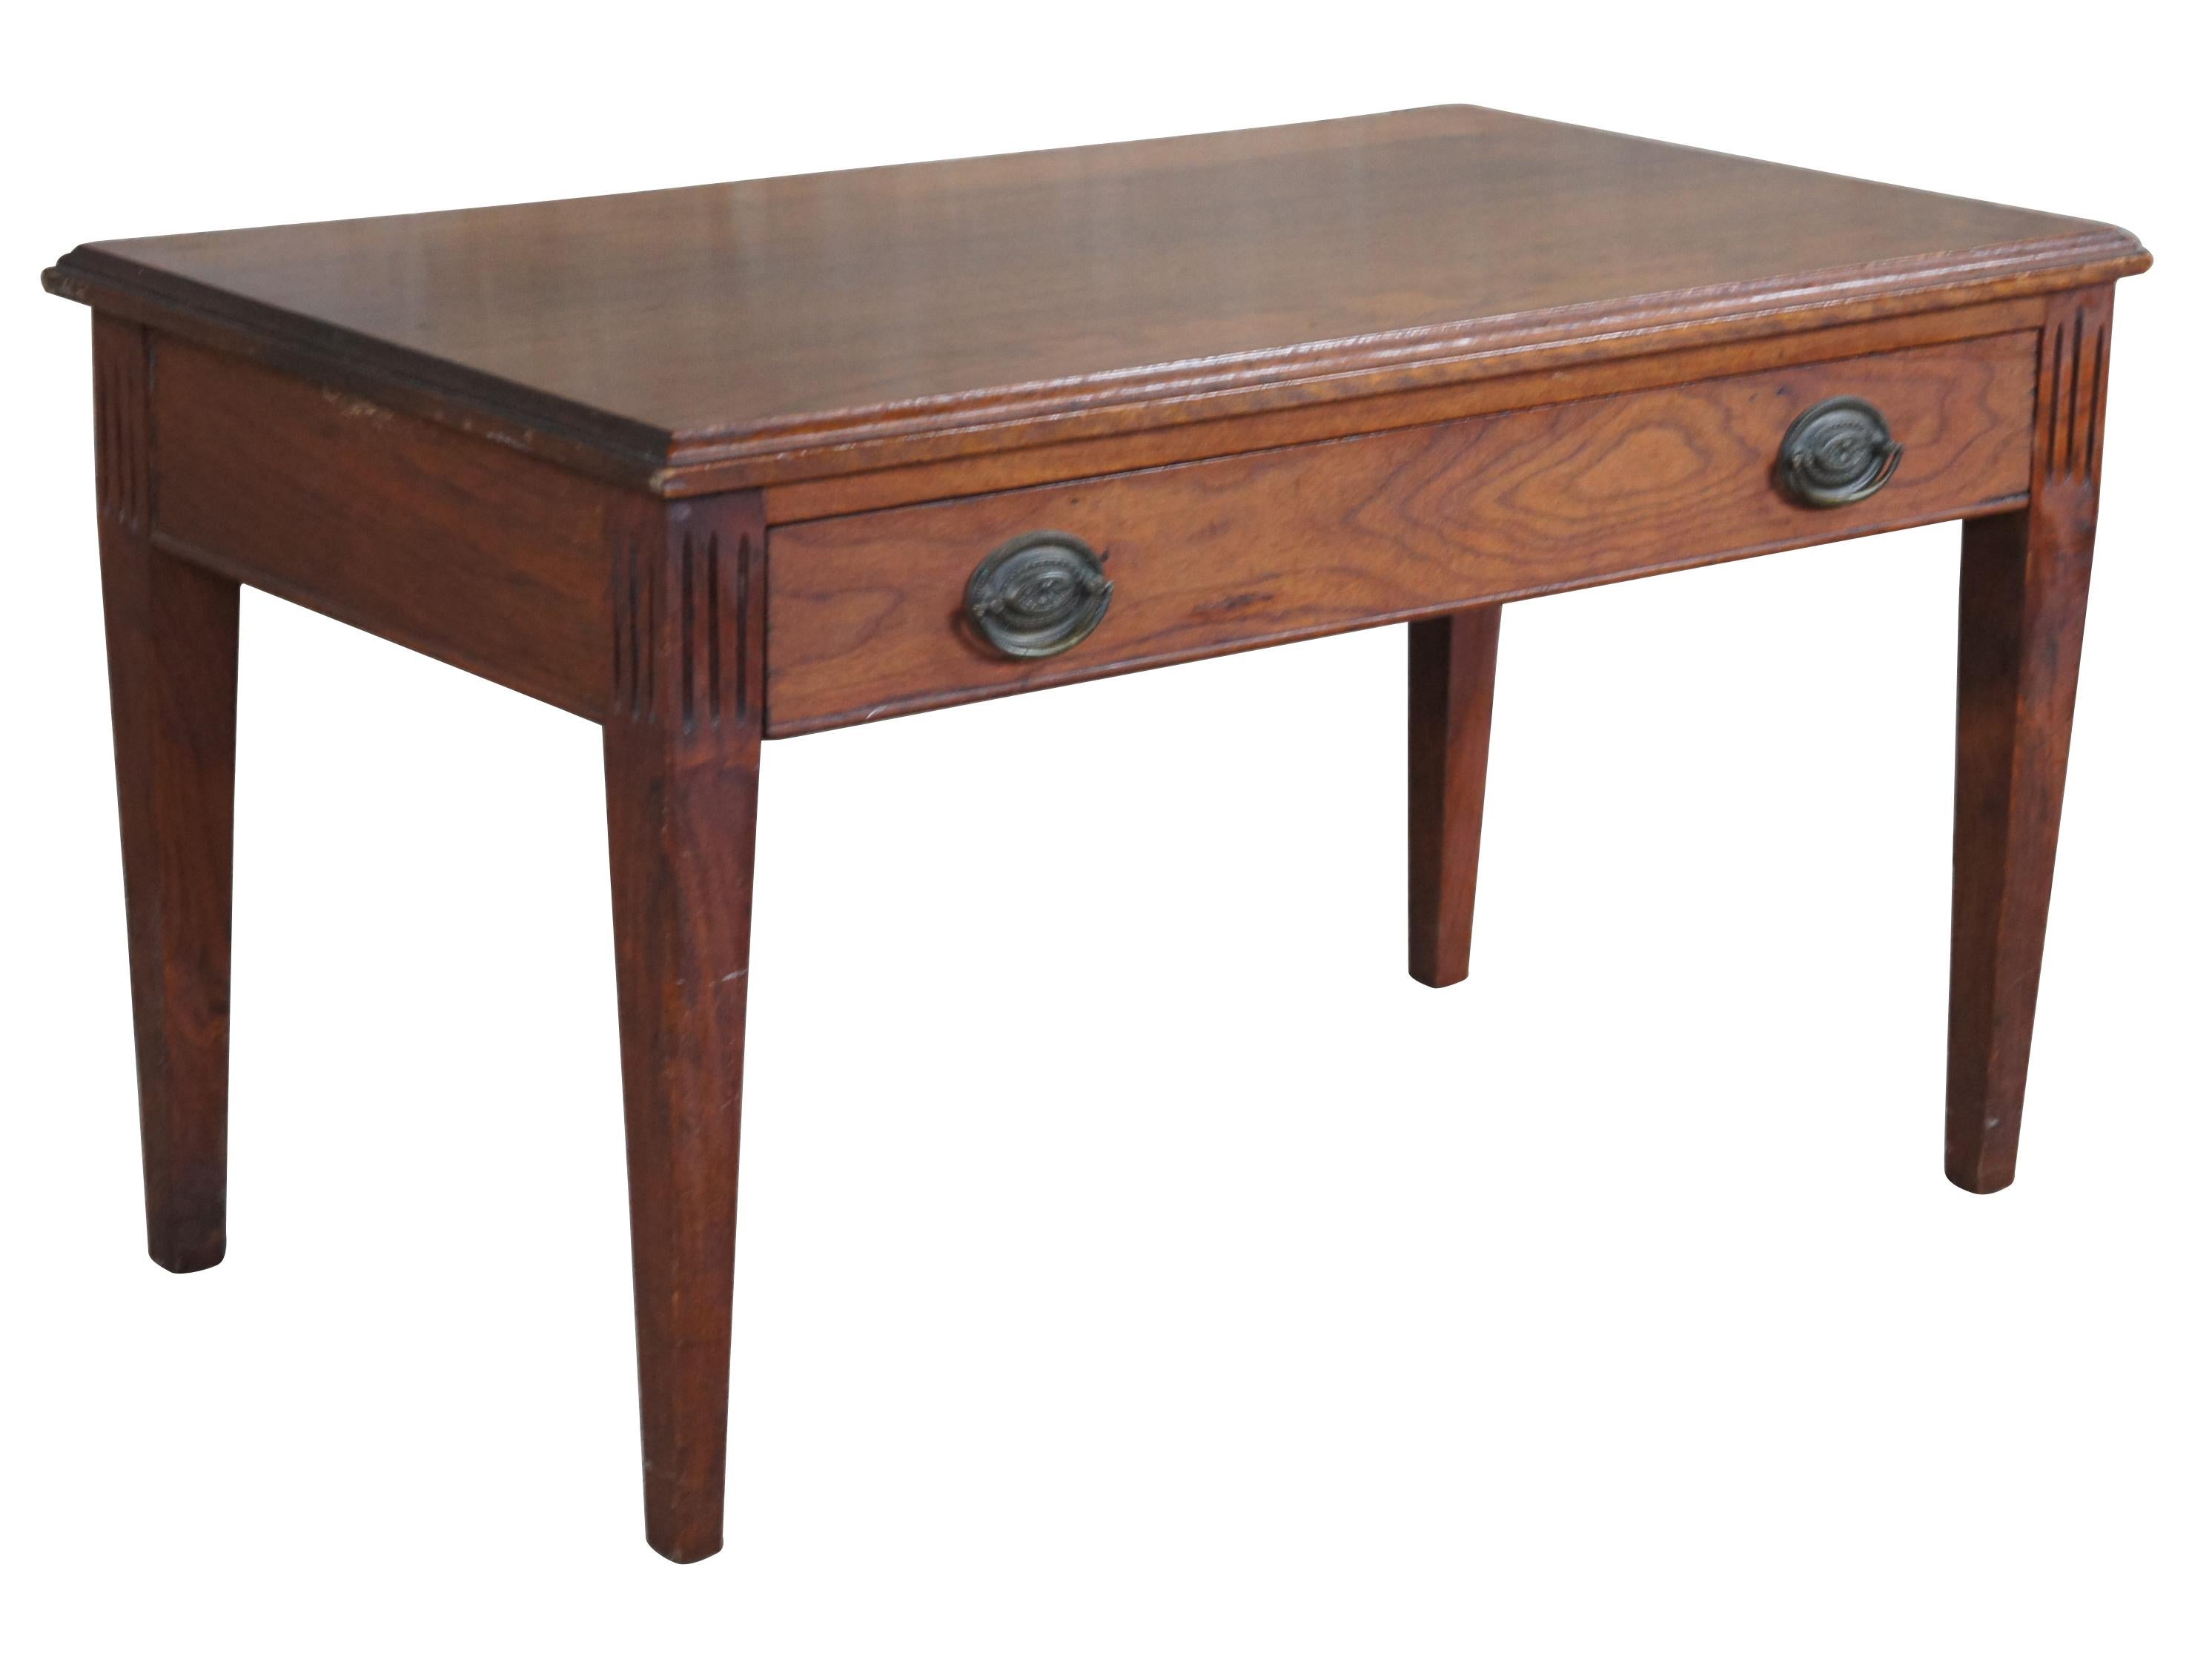 Mid-20th century Sheraton or Federal style bench. A rectangular form made from walnut with a large central rabbit joint drawer featuring oval brass hardware. The bench is supported by square tapered legs with fluted accent along the top. Its